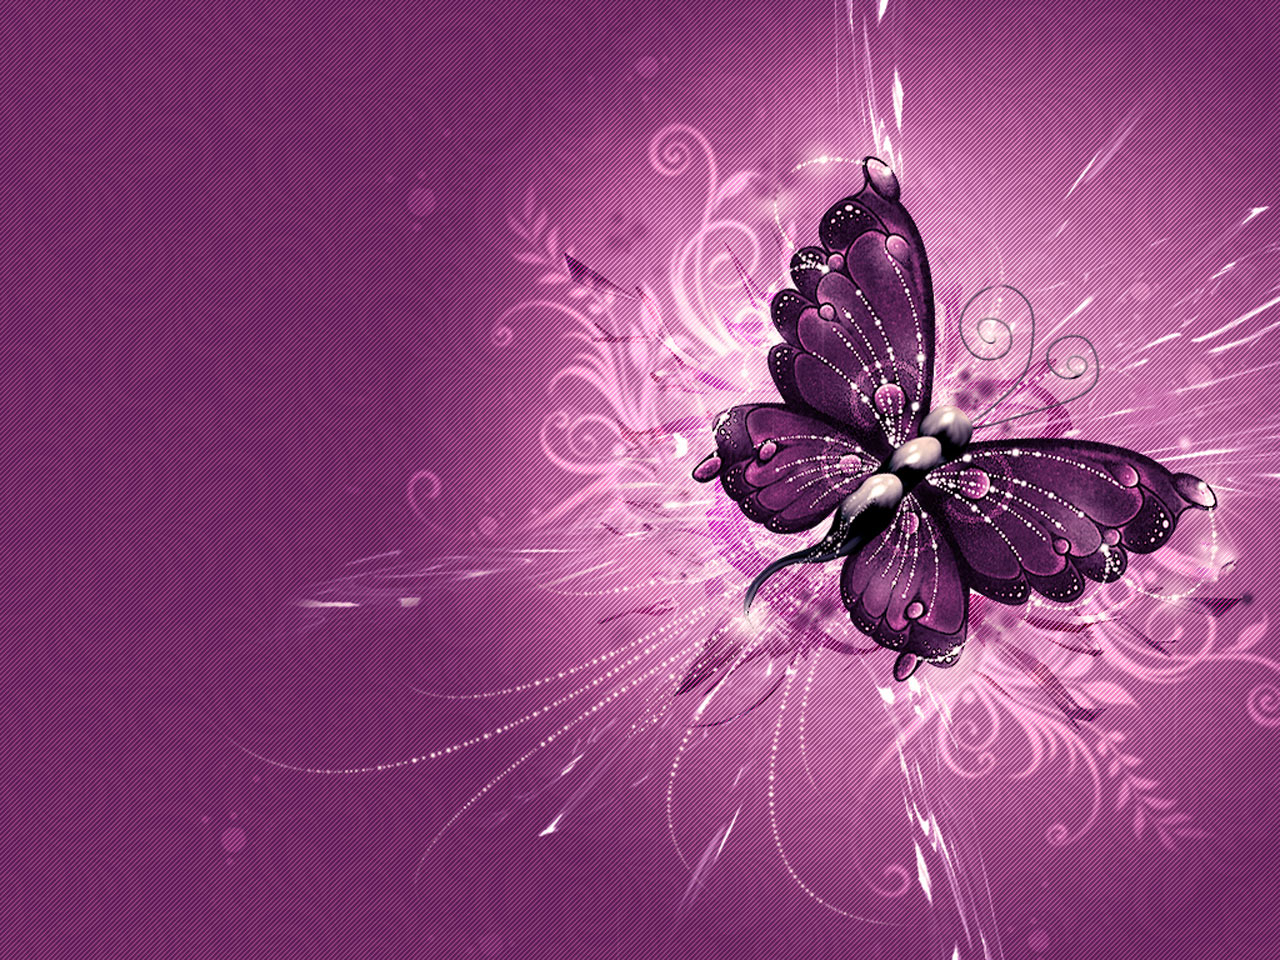 Abstract Purple Butterfly Design Free Ppt Backgrounds For Your Powerpoint Templates